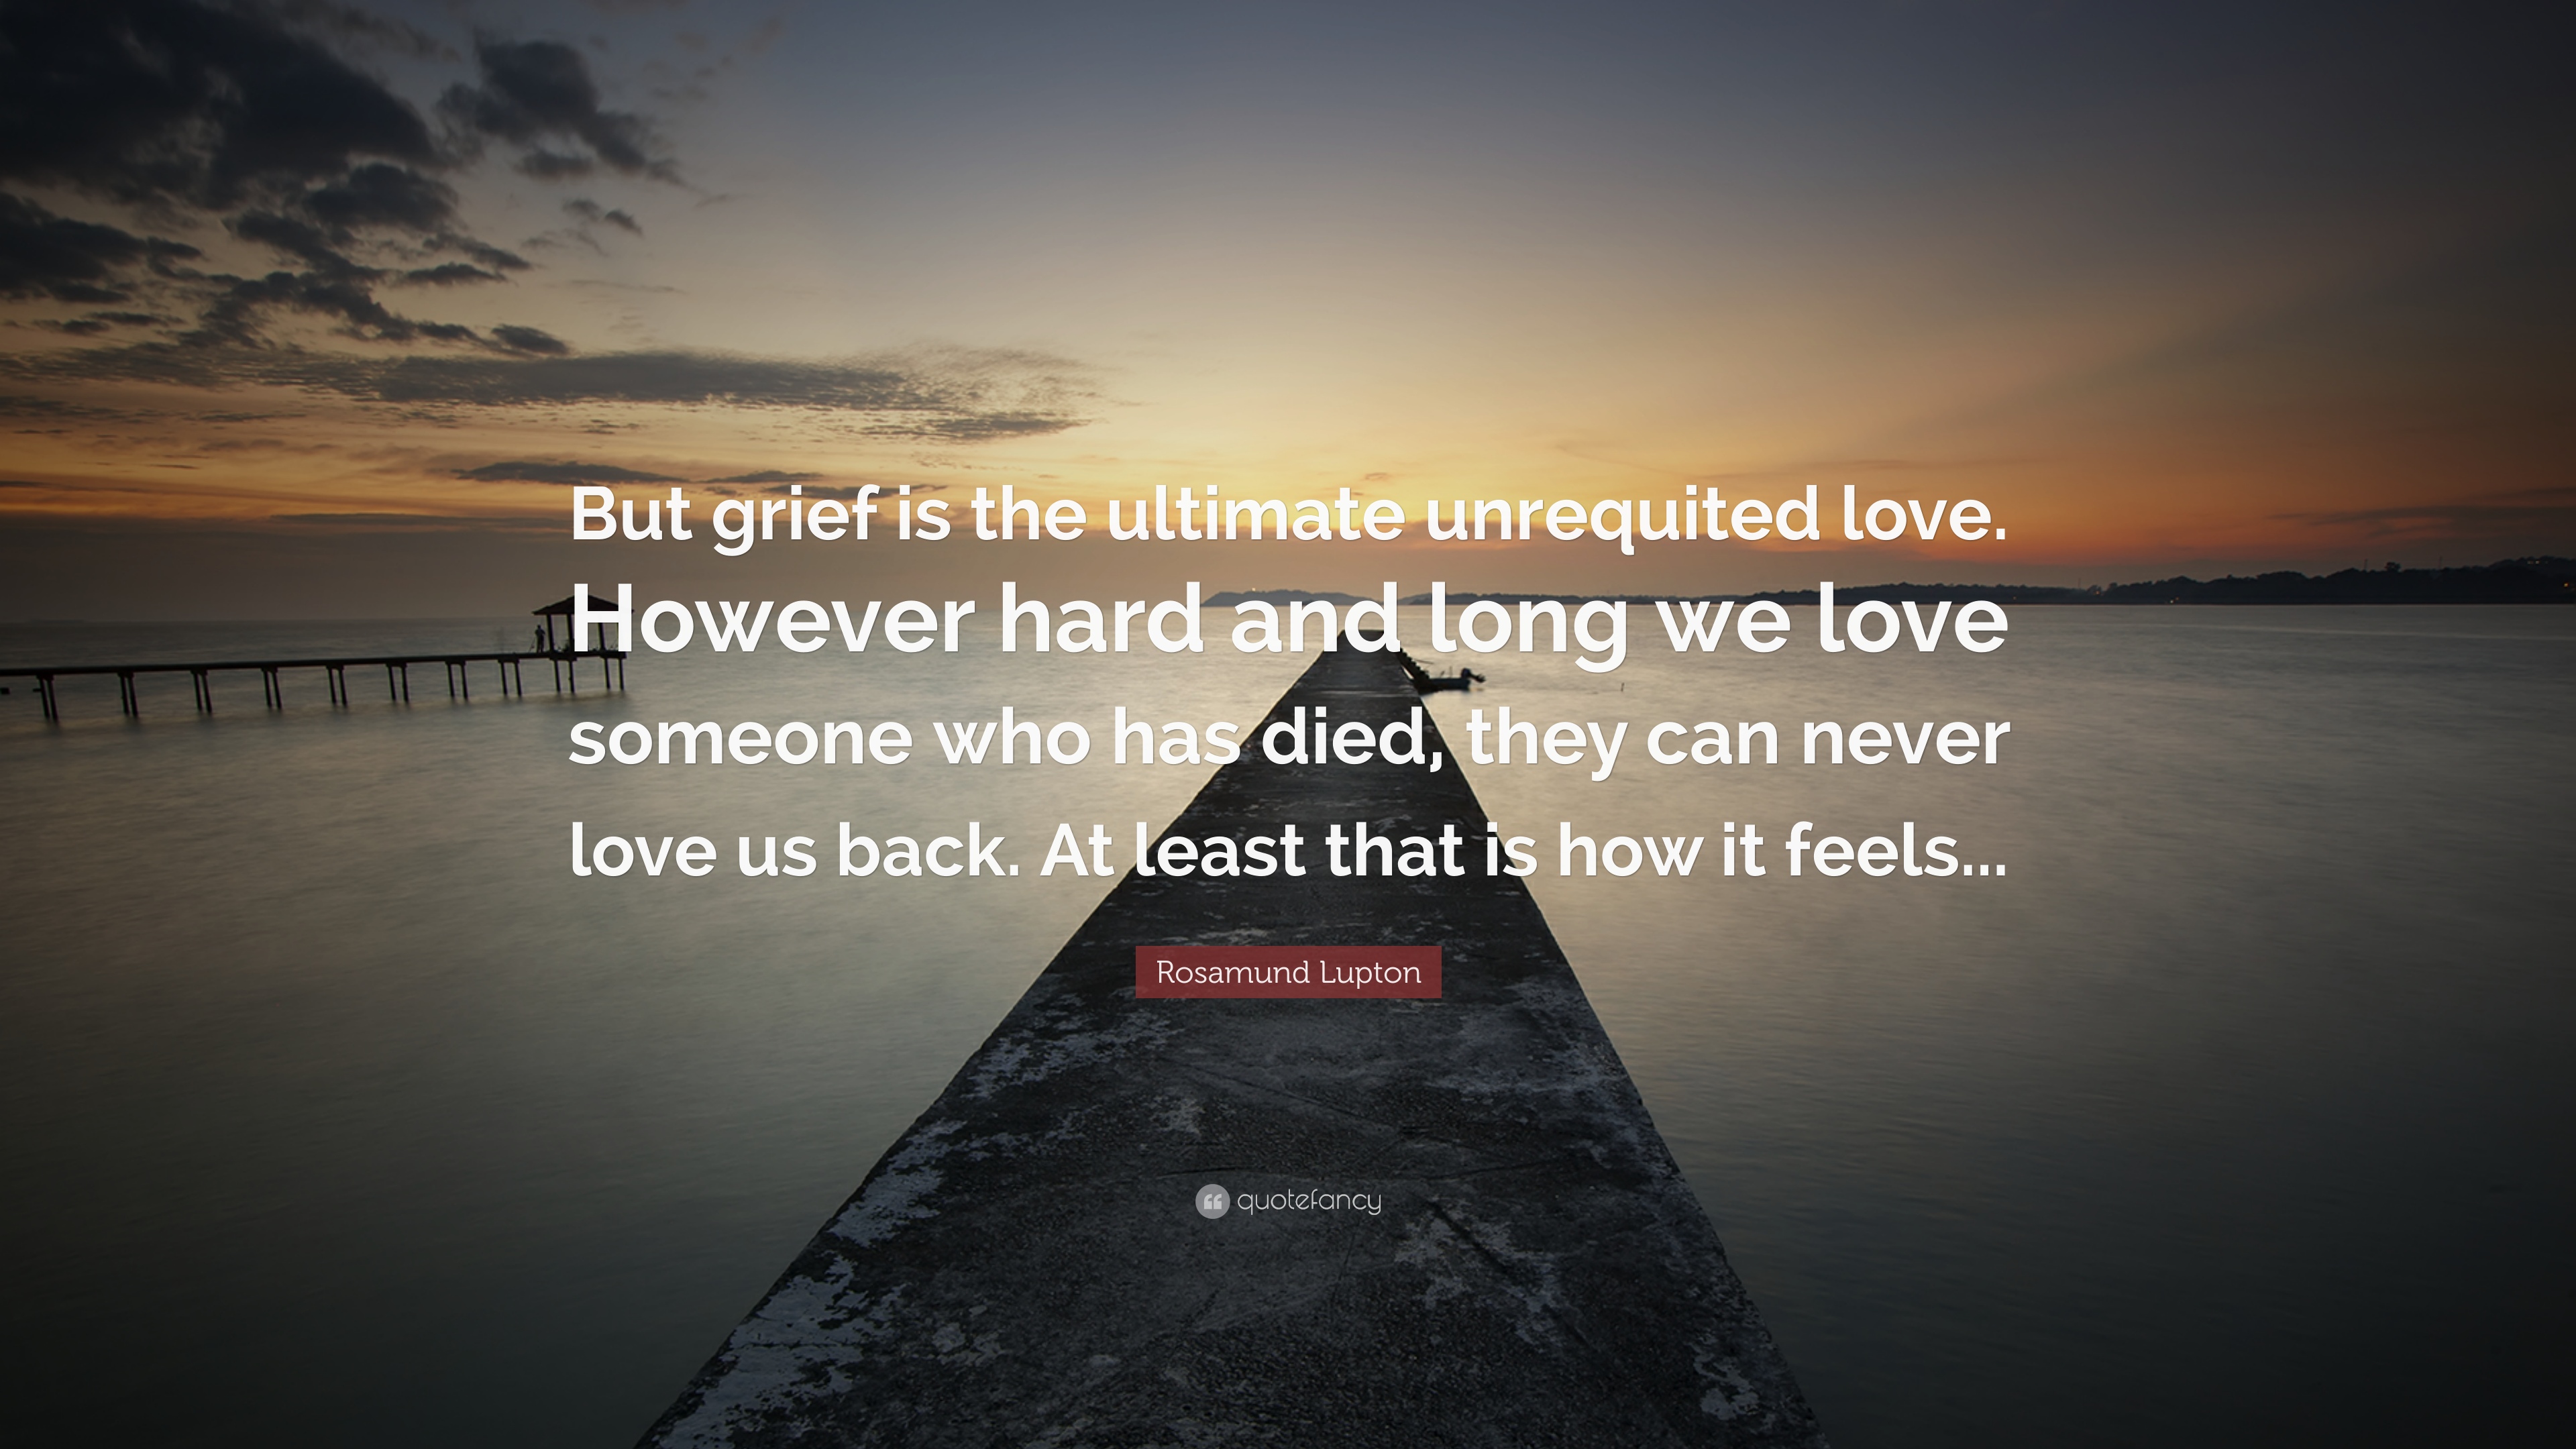 Rosamund Lupton Quote: "But grief is the ultimate unrequited.